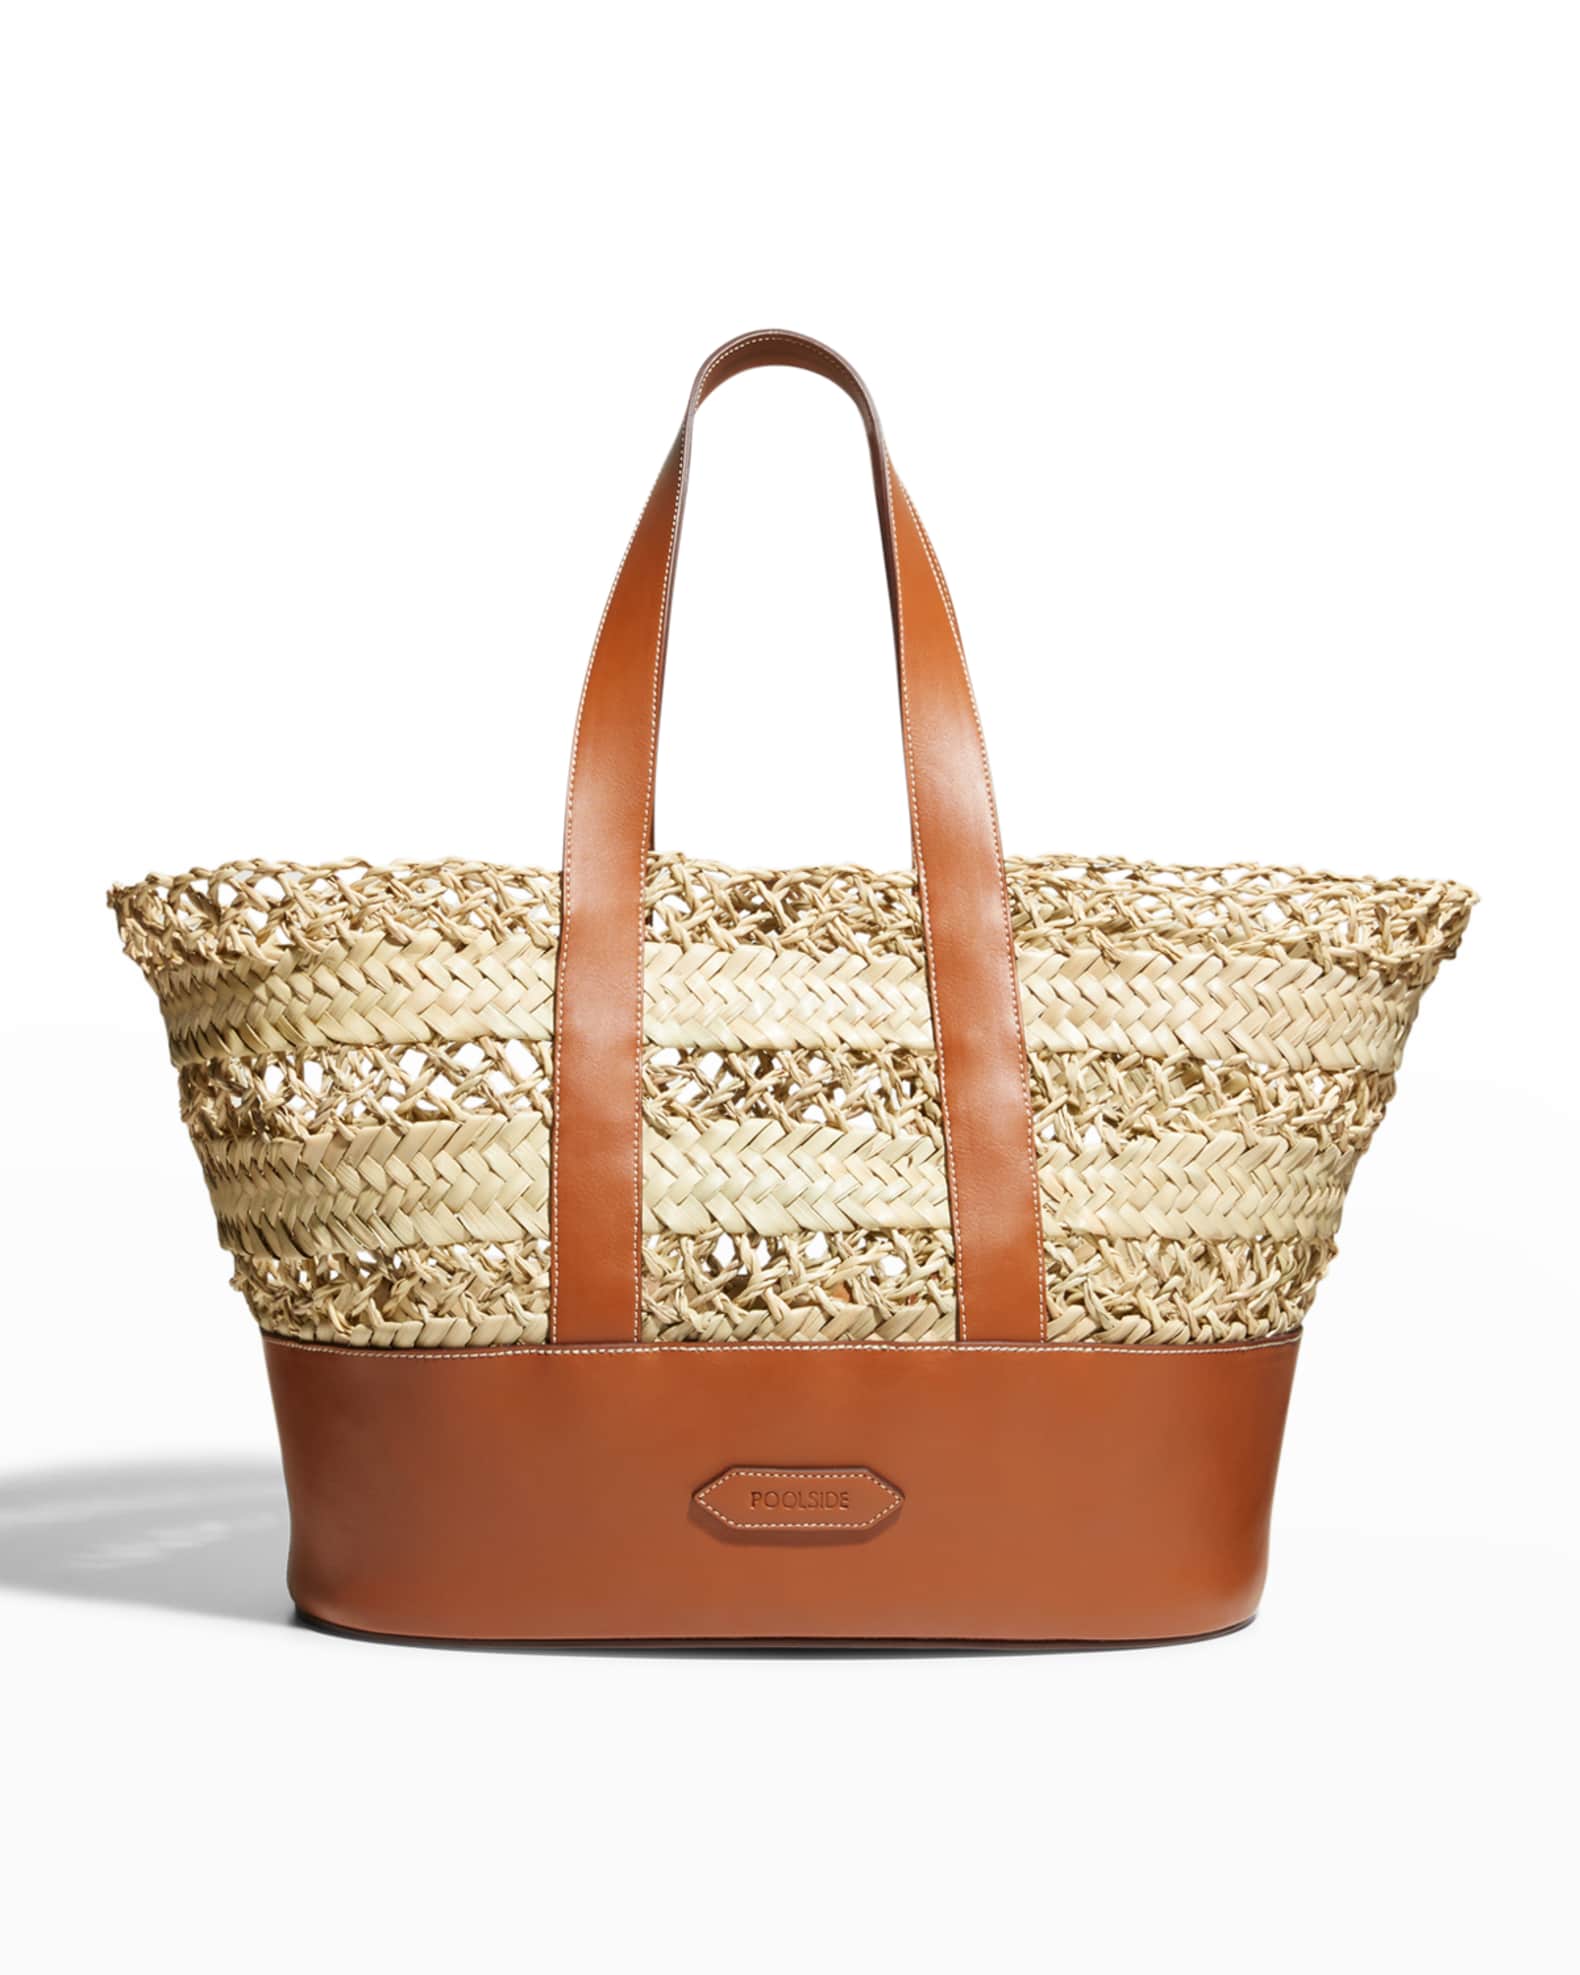 POOLSIDE The Cannes Large Cutout Straw Tote Bag | Neiman Marcus